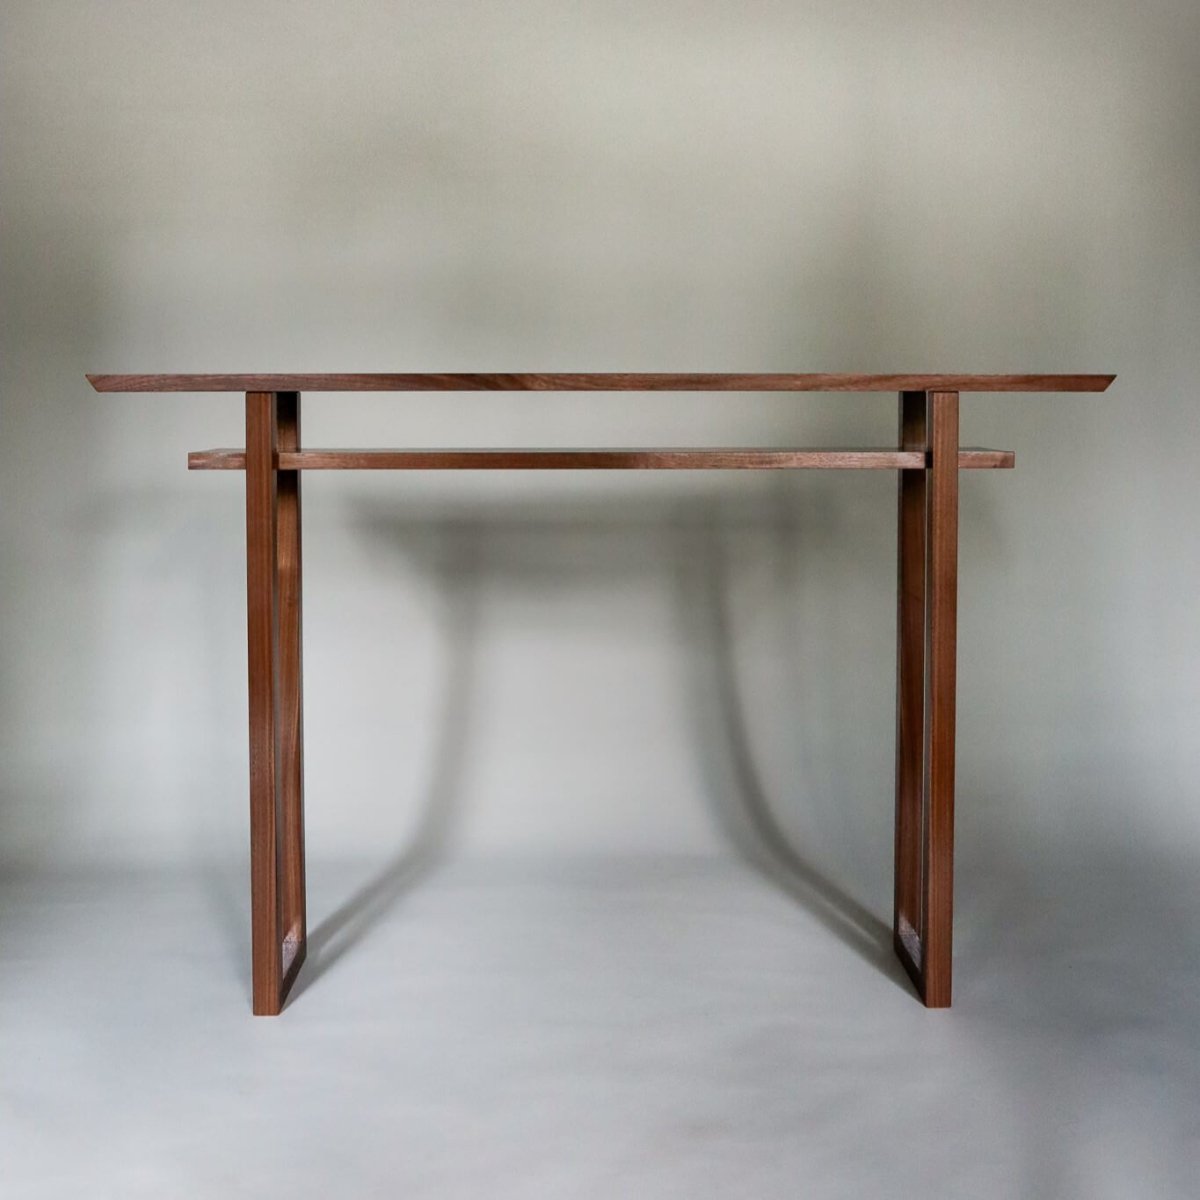 A walnut console table with shelf by Mokuzai Furniture.  Designed for narrow hallways decorating, this modern console table is made from premium walnut wood.